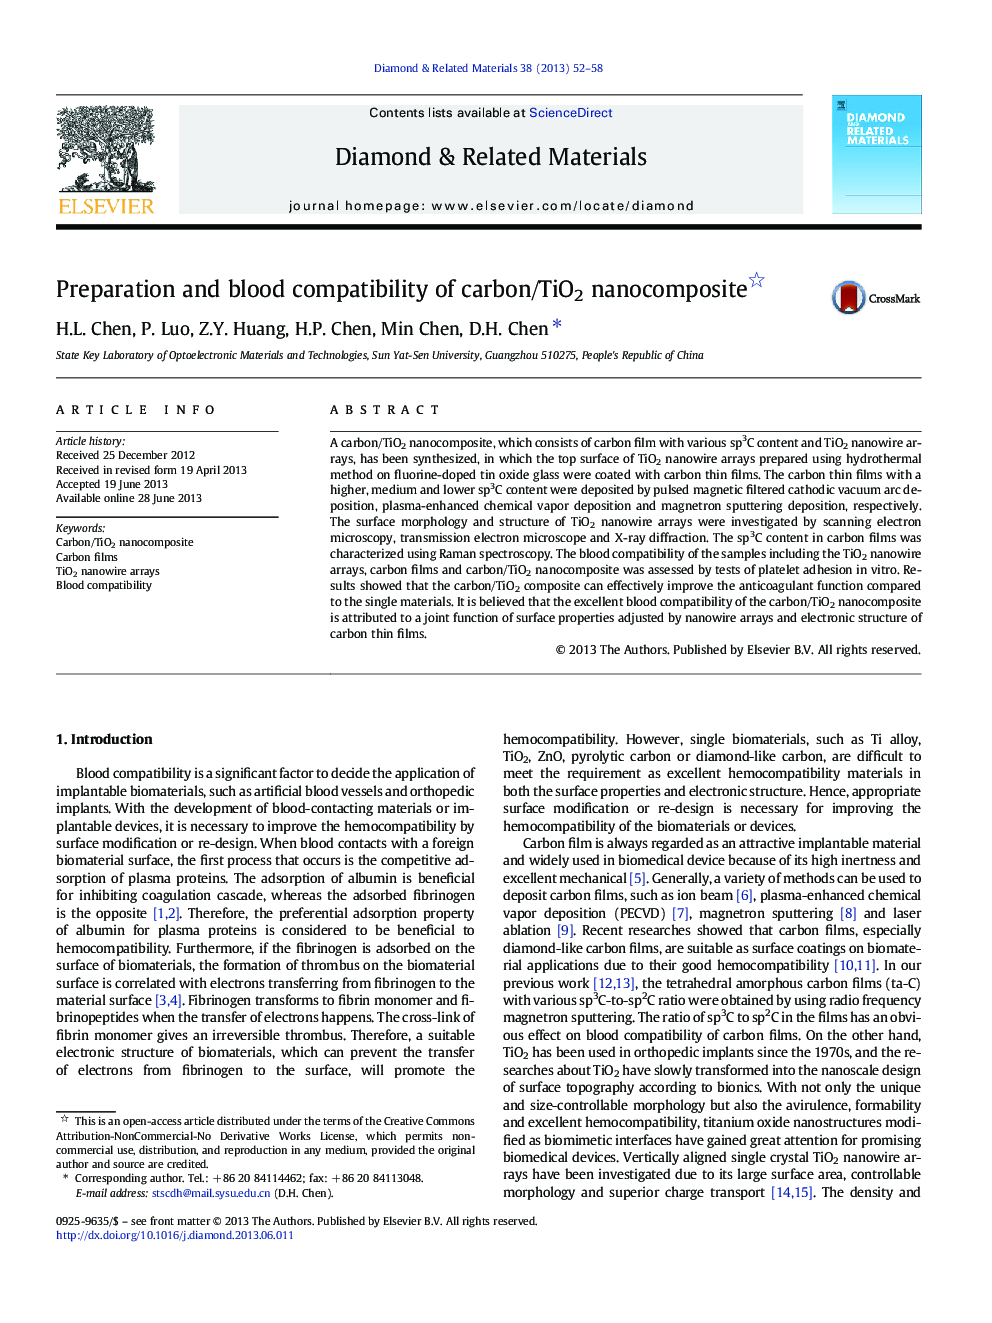 Preparation and blood compatibility of carbon/TiO2 nanocomposite